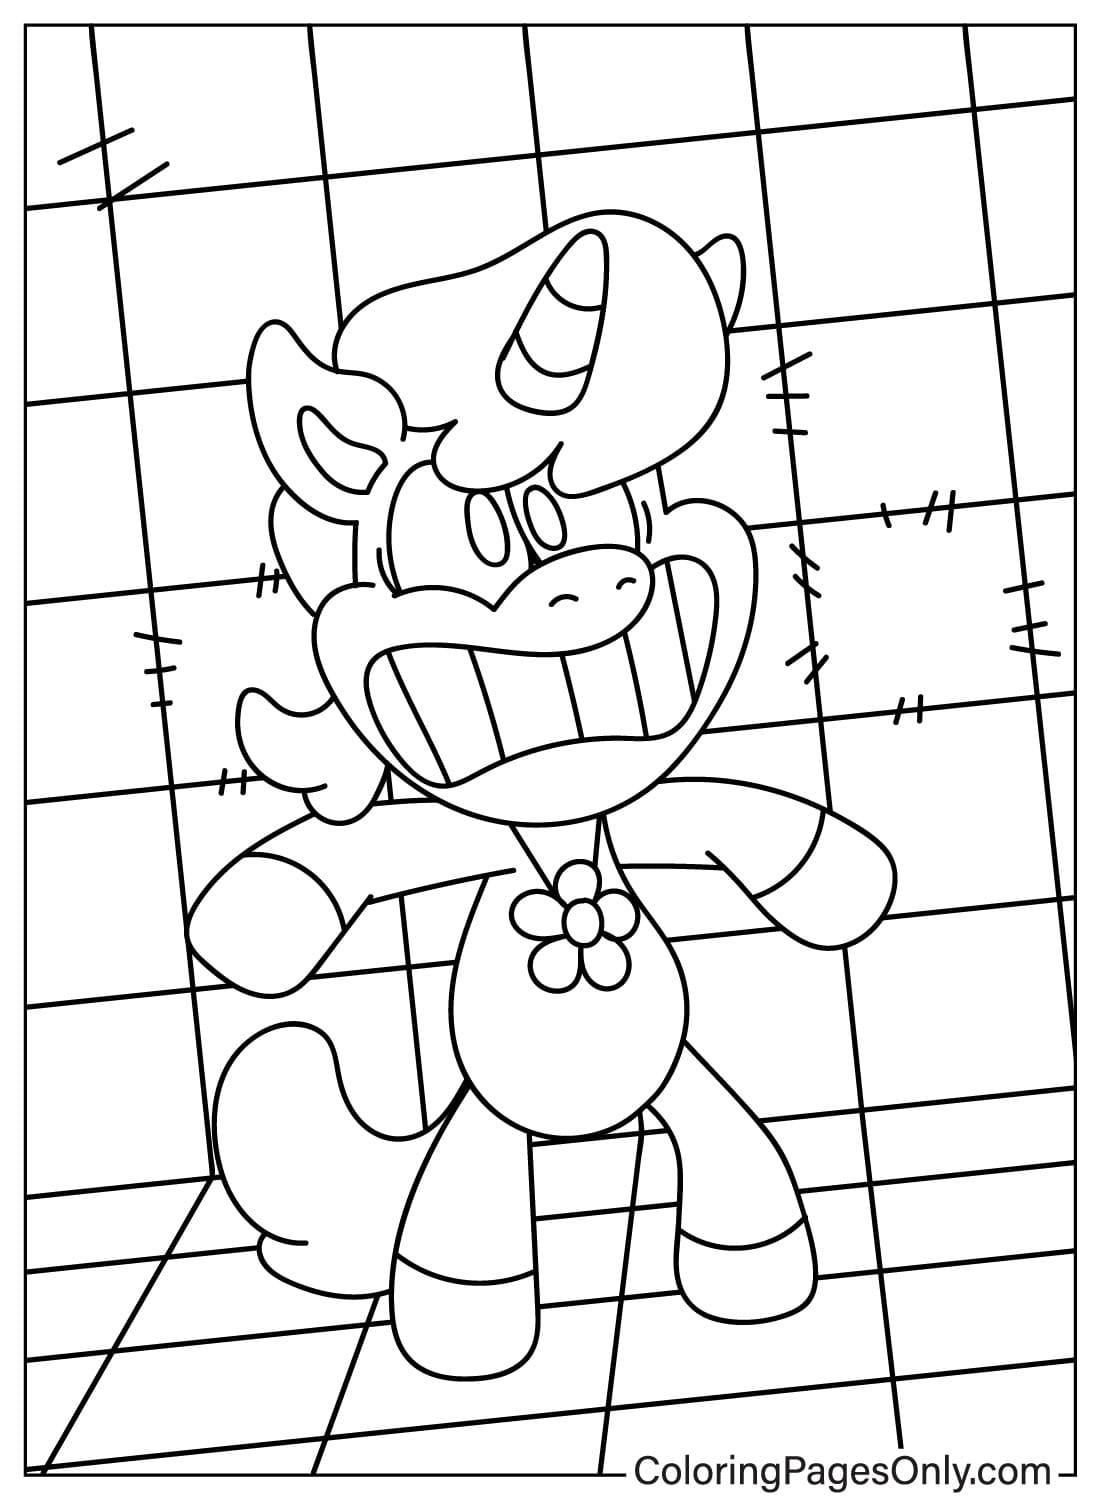 CraftyCorn Scared Coloring Page from CraftyCorn